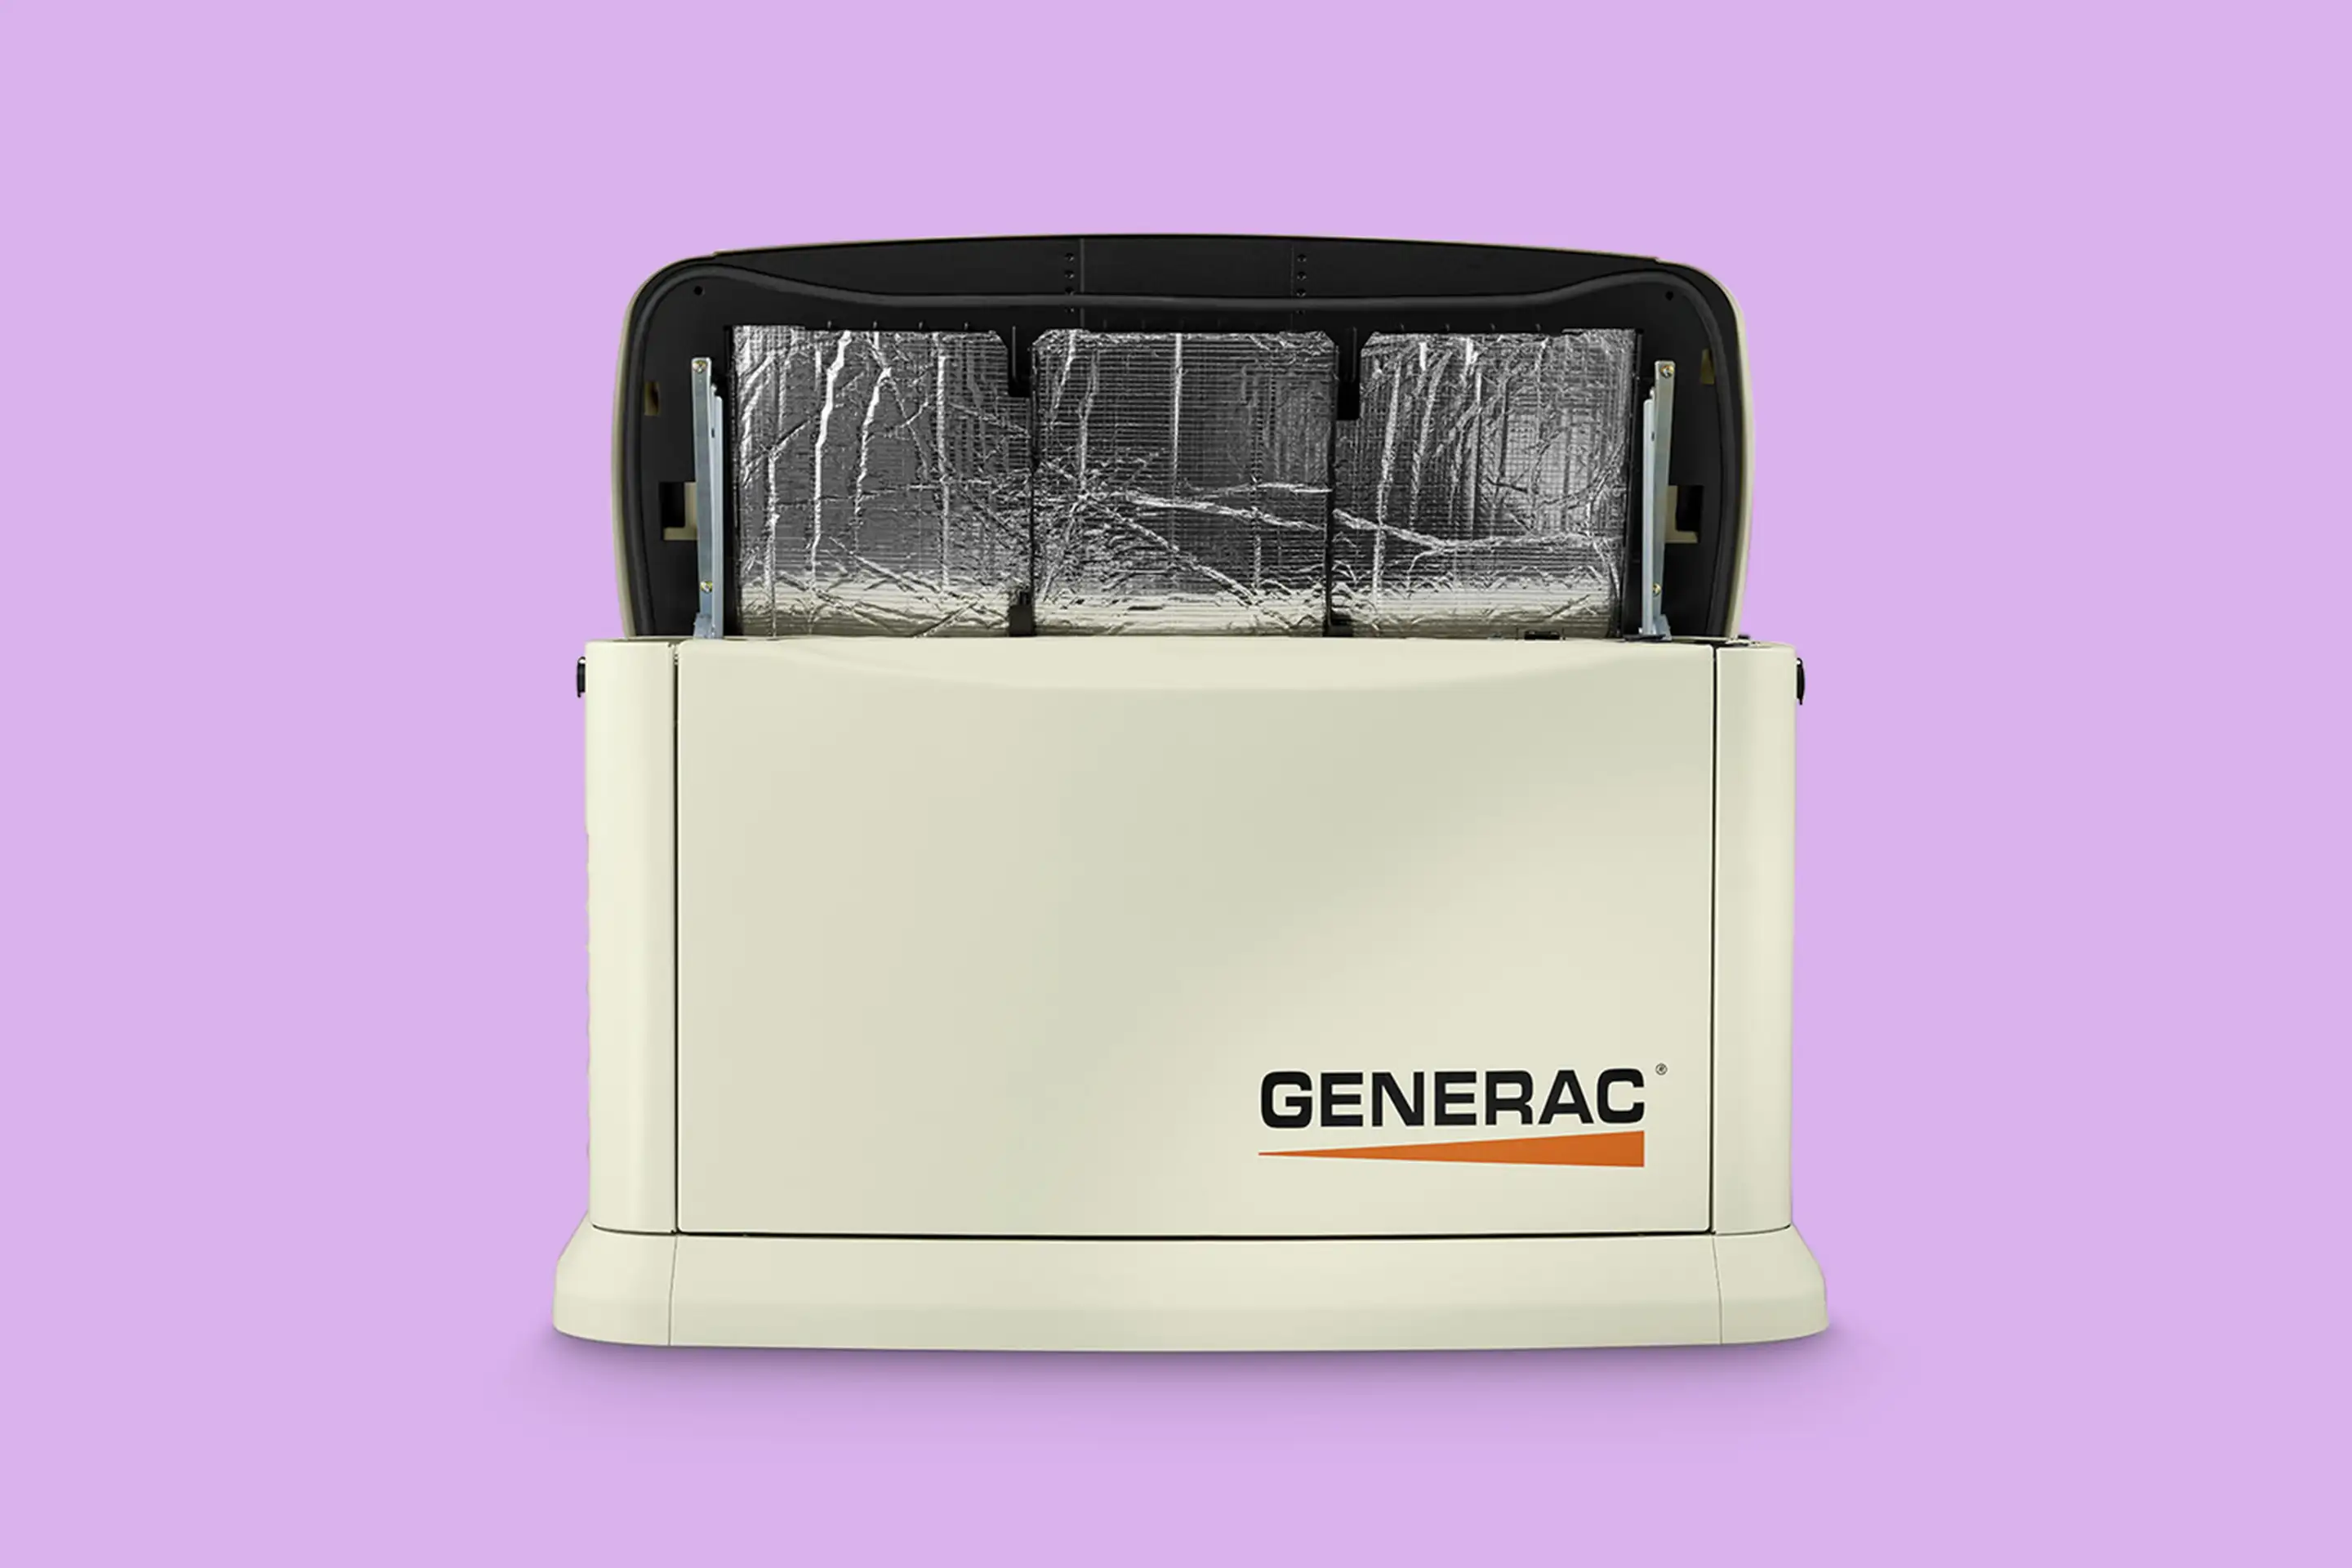 Generac generator in front of a purple background